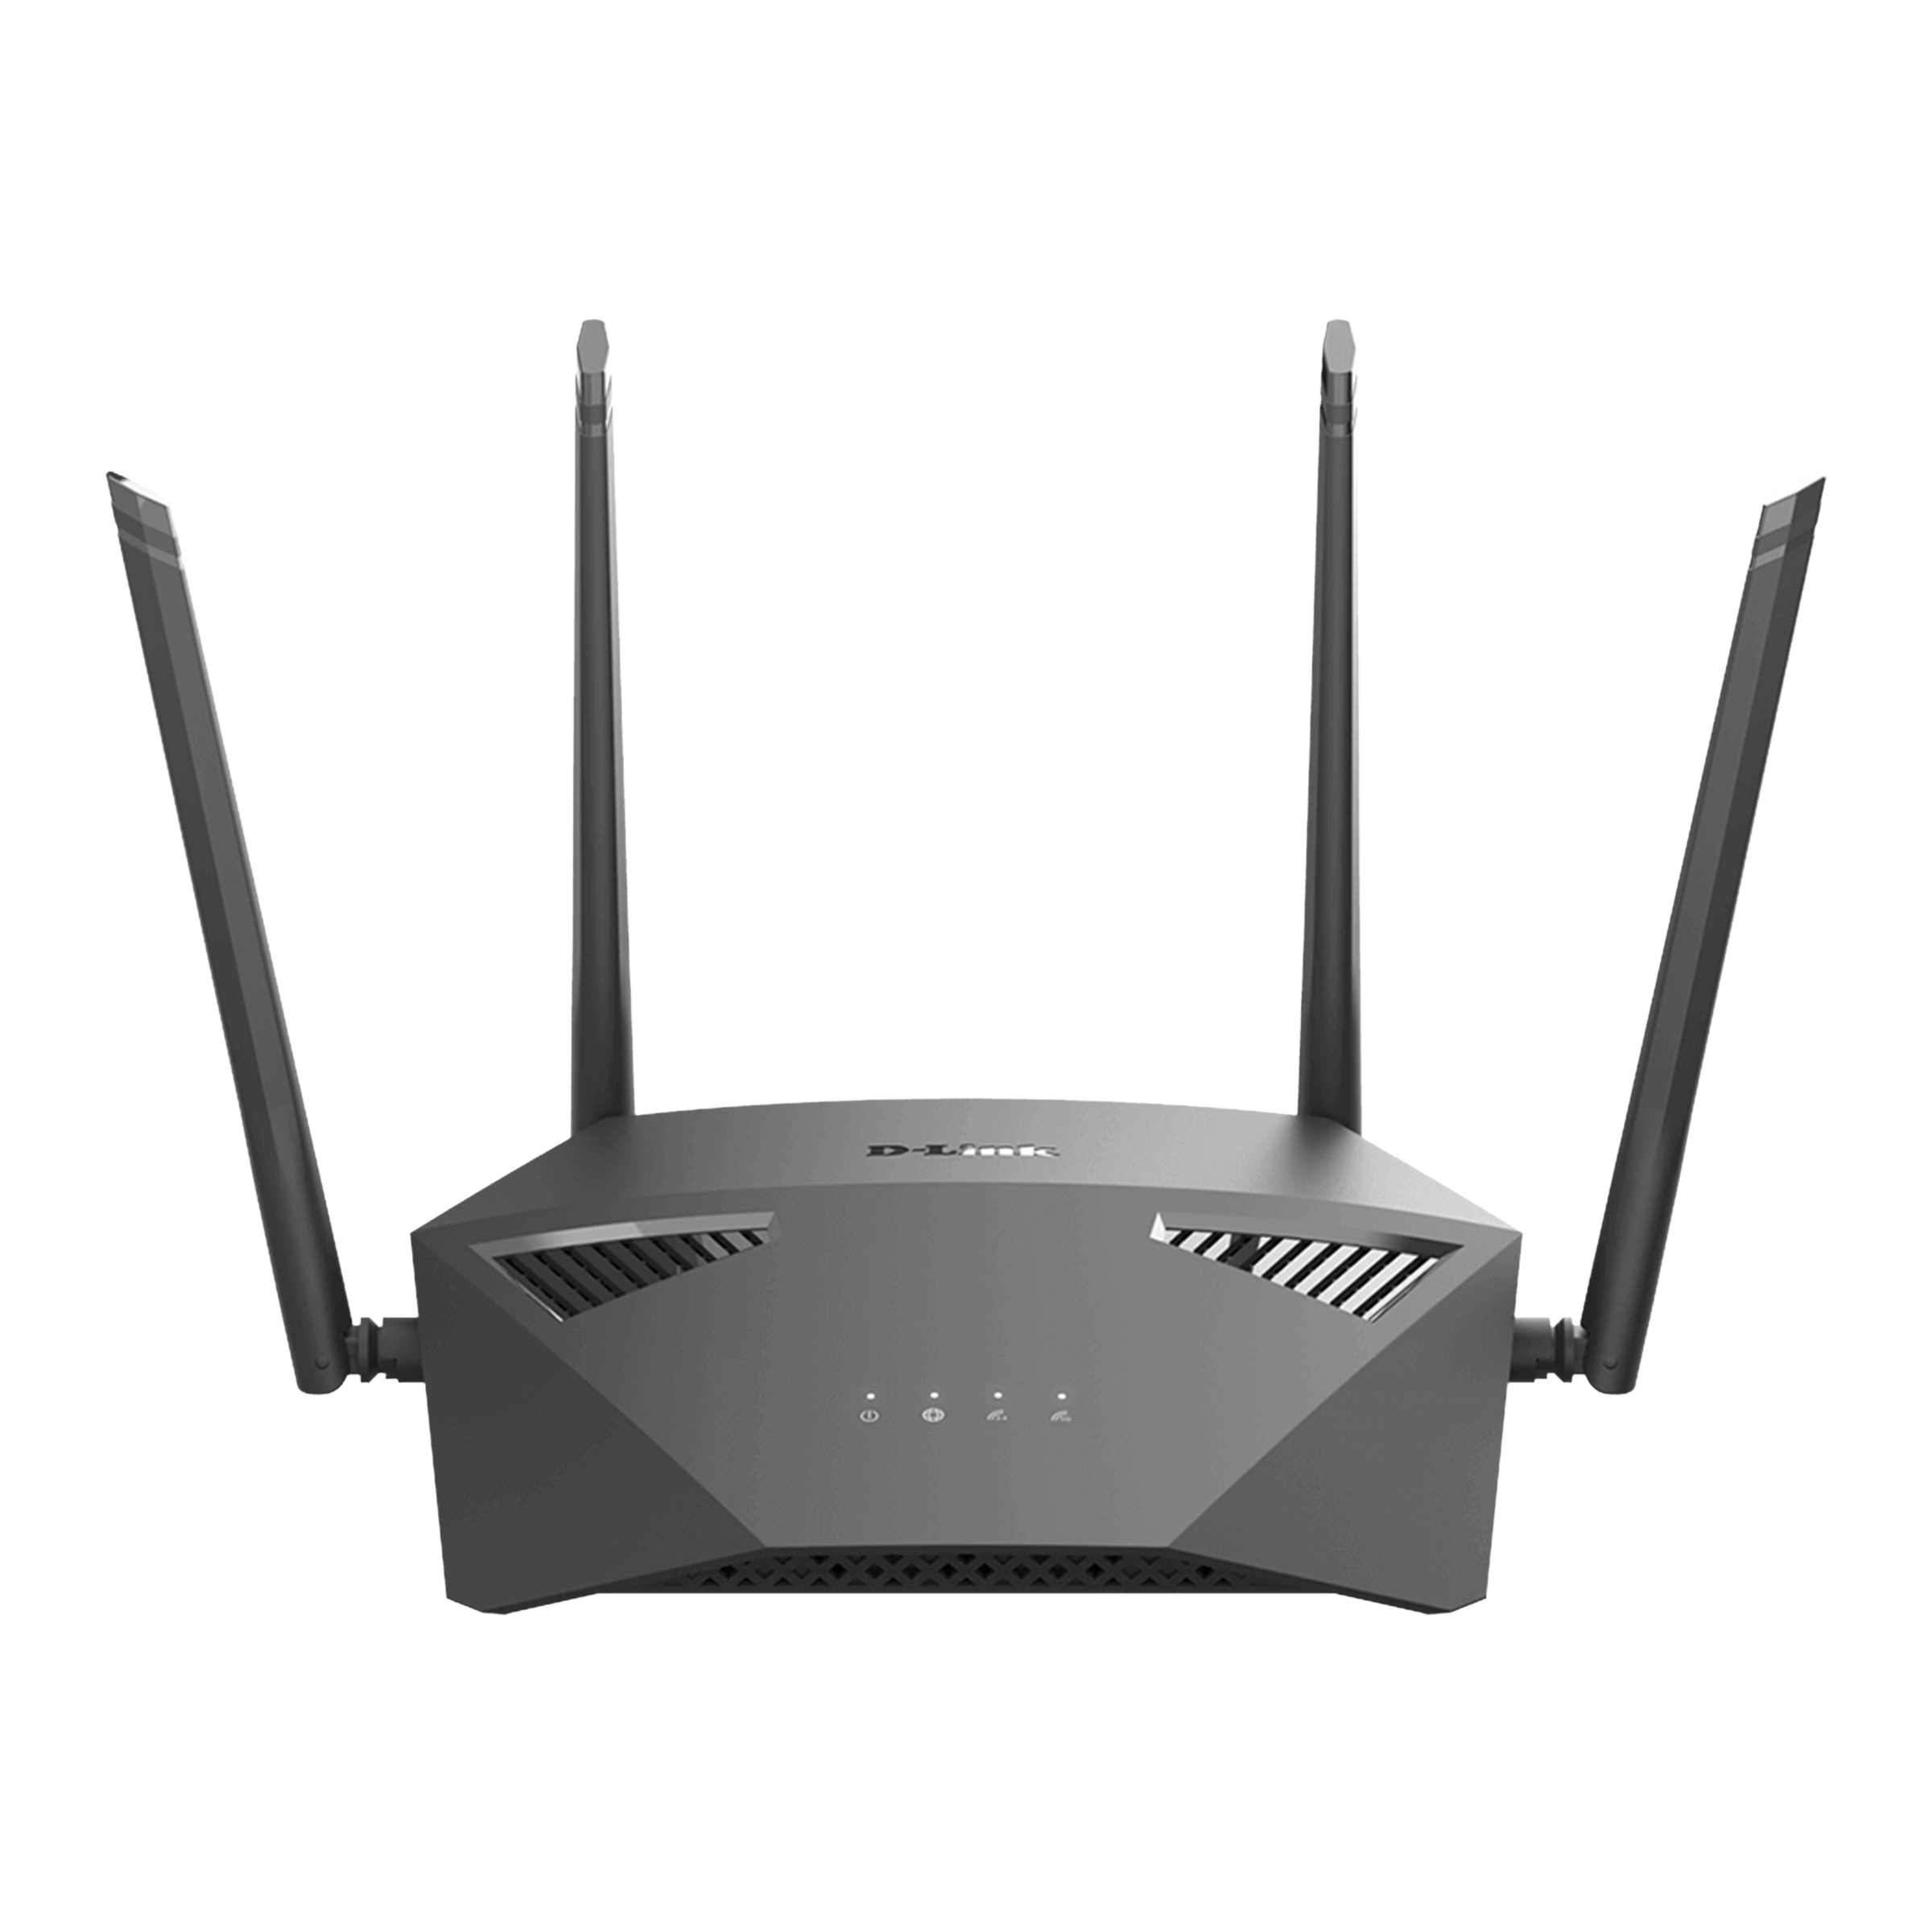 D-Link AC 1900 Dual Band 1300 Mbps Wi-Fi EasyMesh Router (4 Antennas, 4 LAN Ports, MU-MIMO Supported, DIR-1950, Black)_1